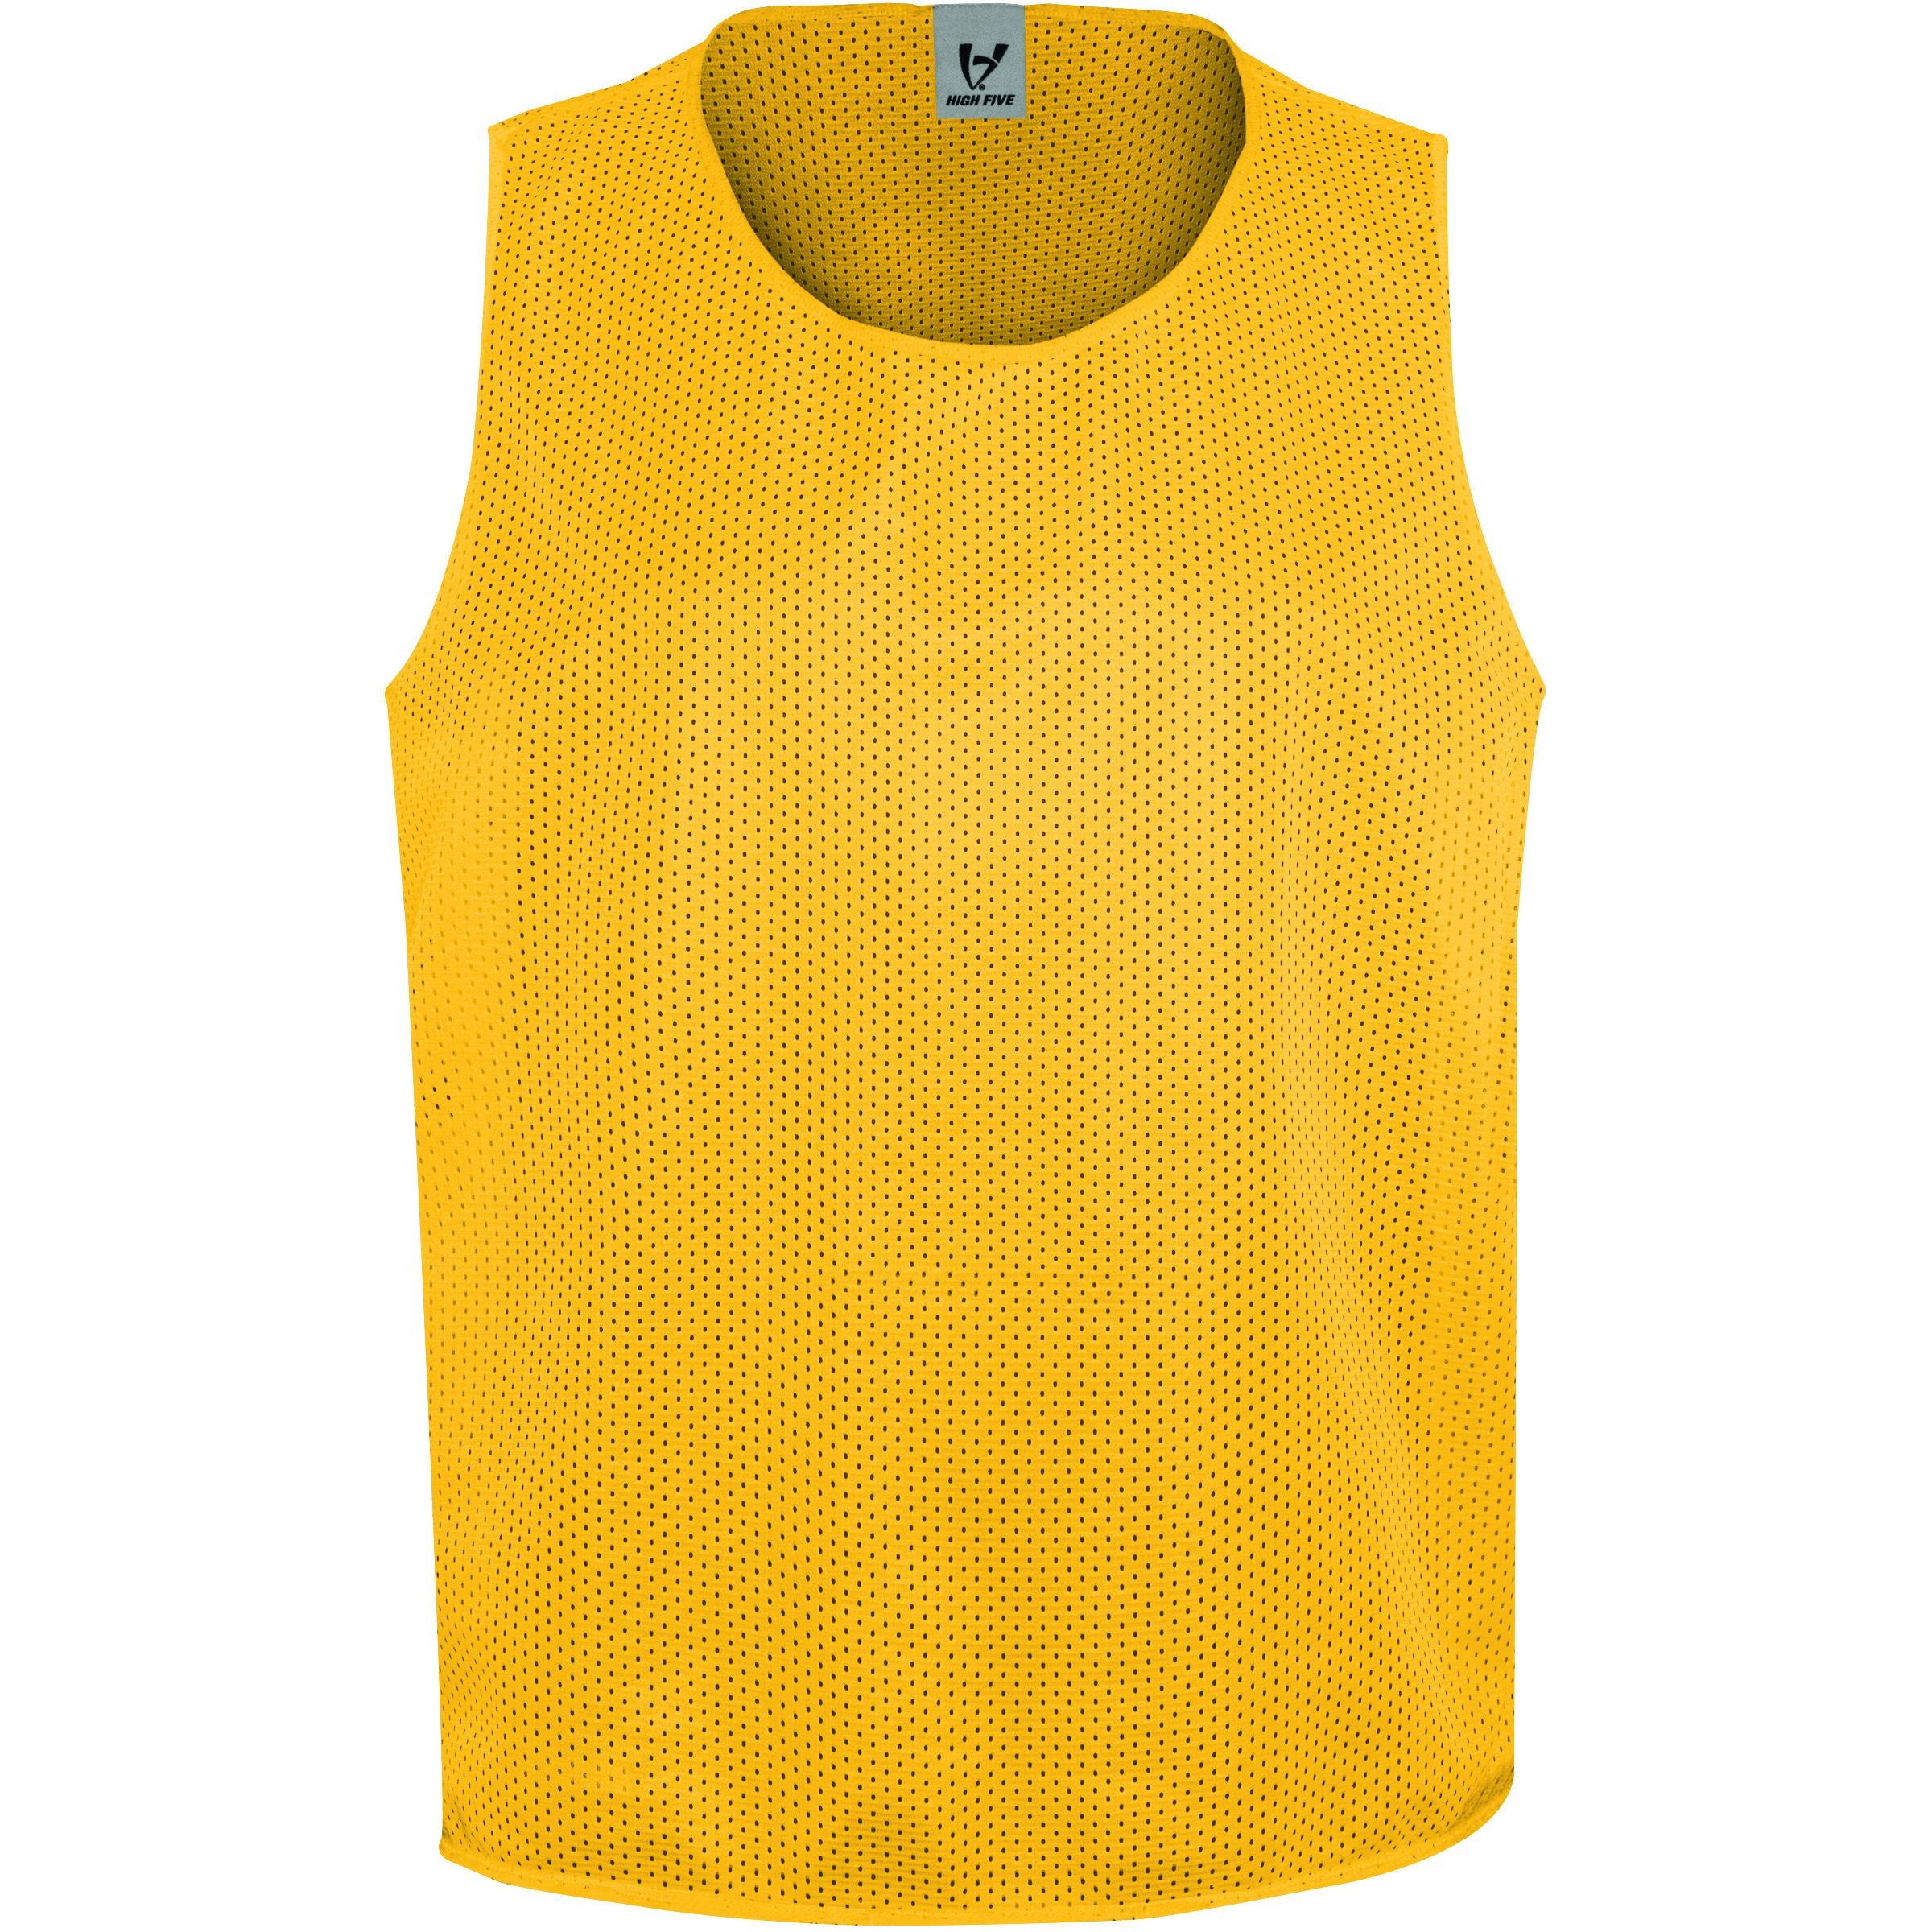 High 5 Youth Scrimmage Vest